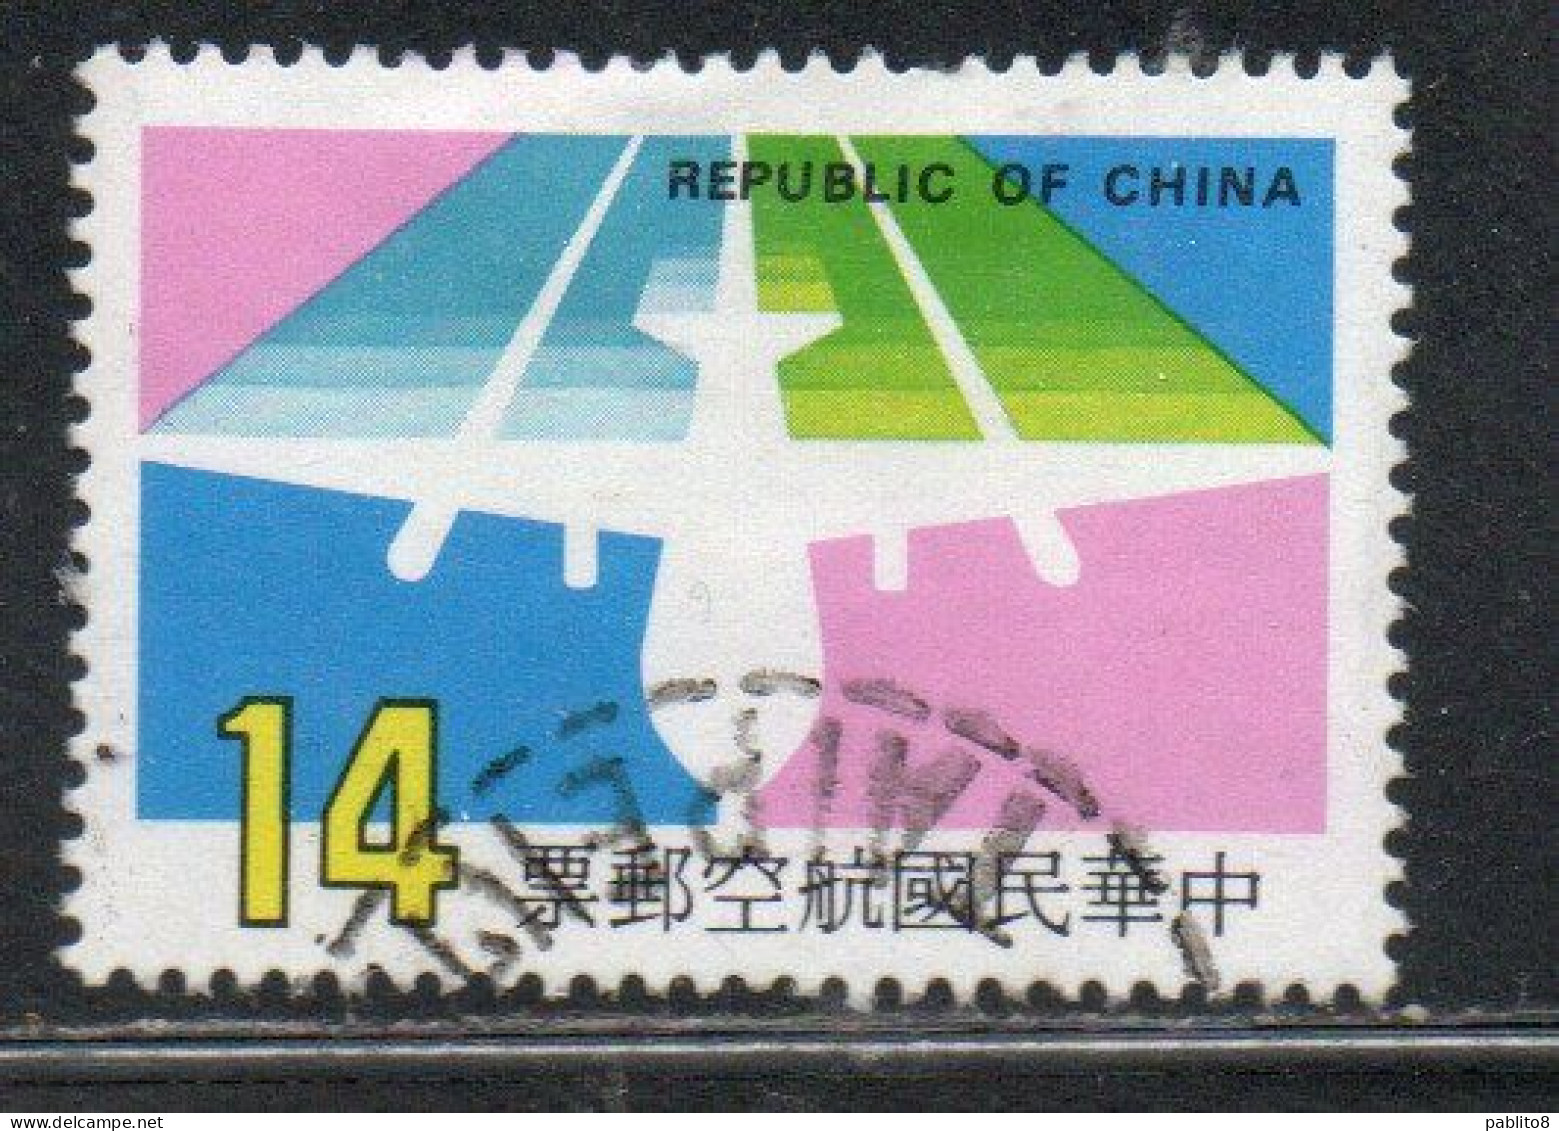 CHINA REPUBLIC CINA TAIWAN FORMOSA 1987 AIR POST MAIL AIRMAIL AIRPLANE 14$ USED USATO OBLITERE' - Luftpost